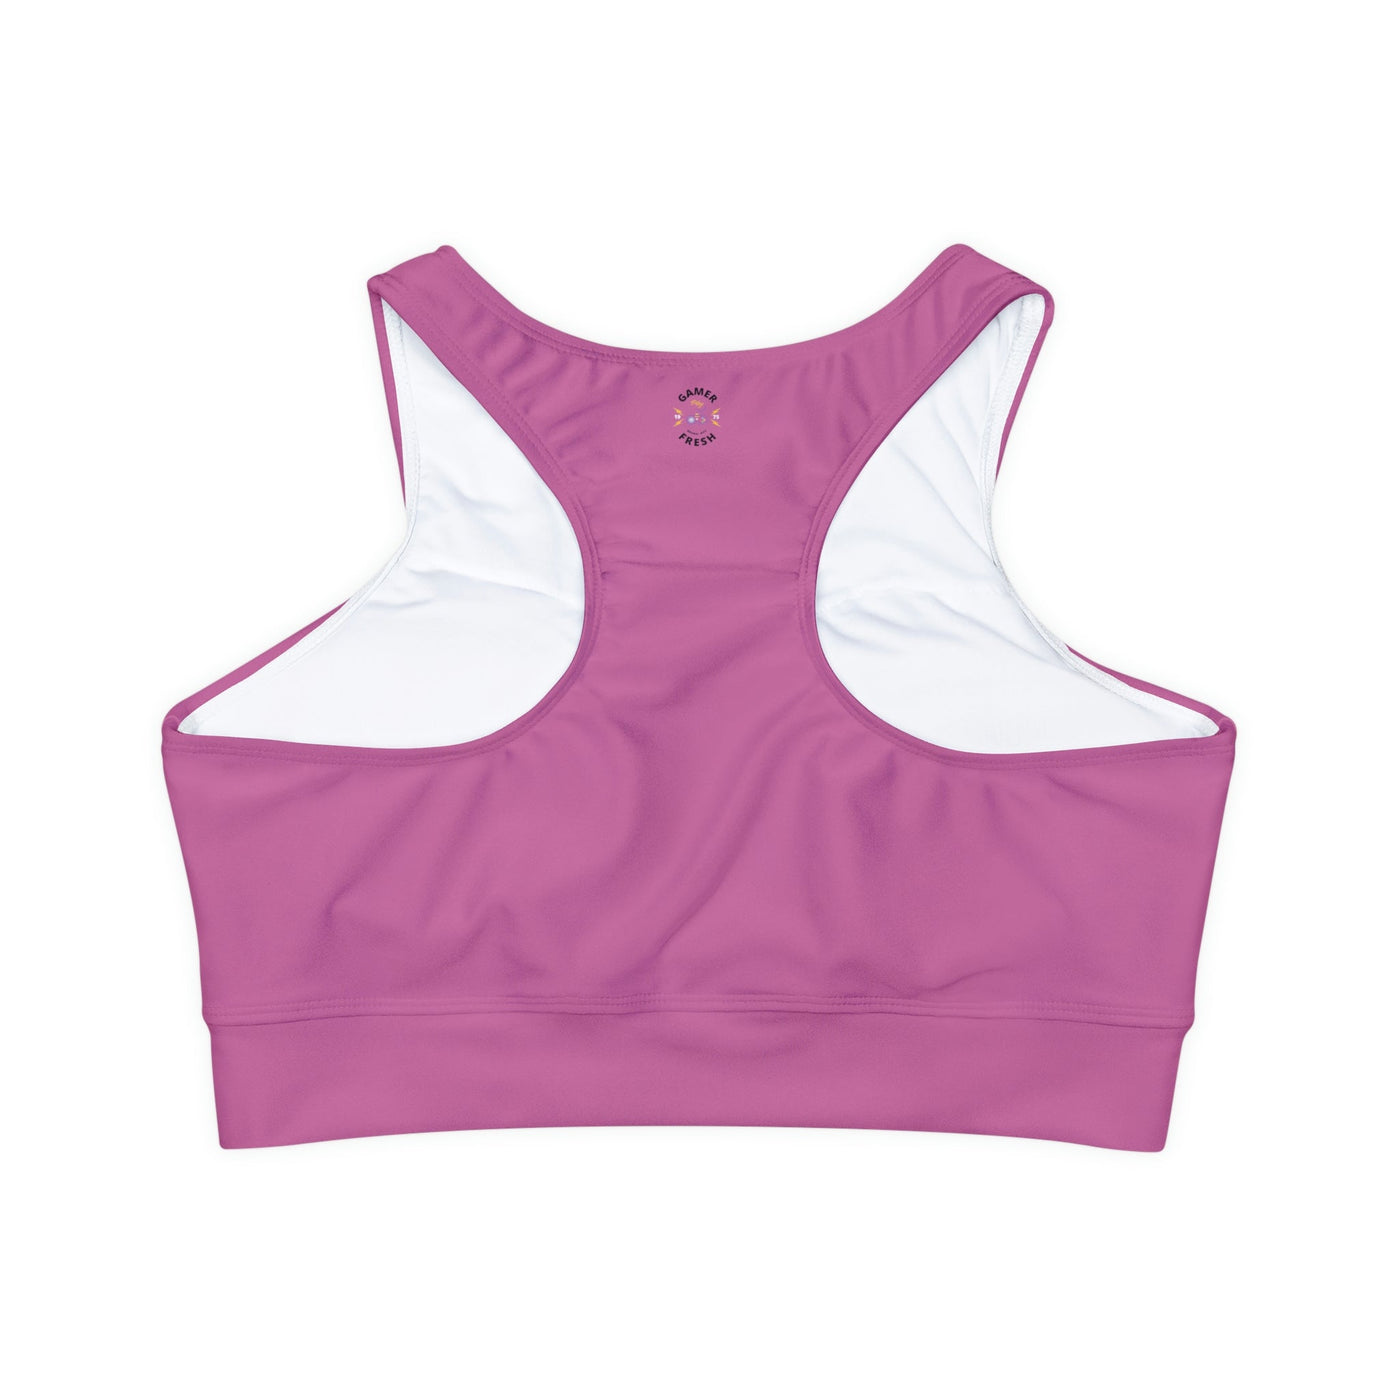 Gamer Fresh Limited Edition | Qahwah Pop | Fully Lined Padded Ladies Light Pink Sports Bra